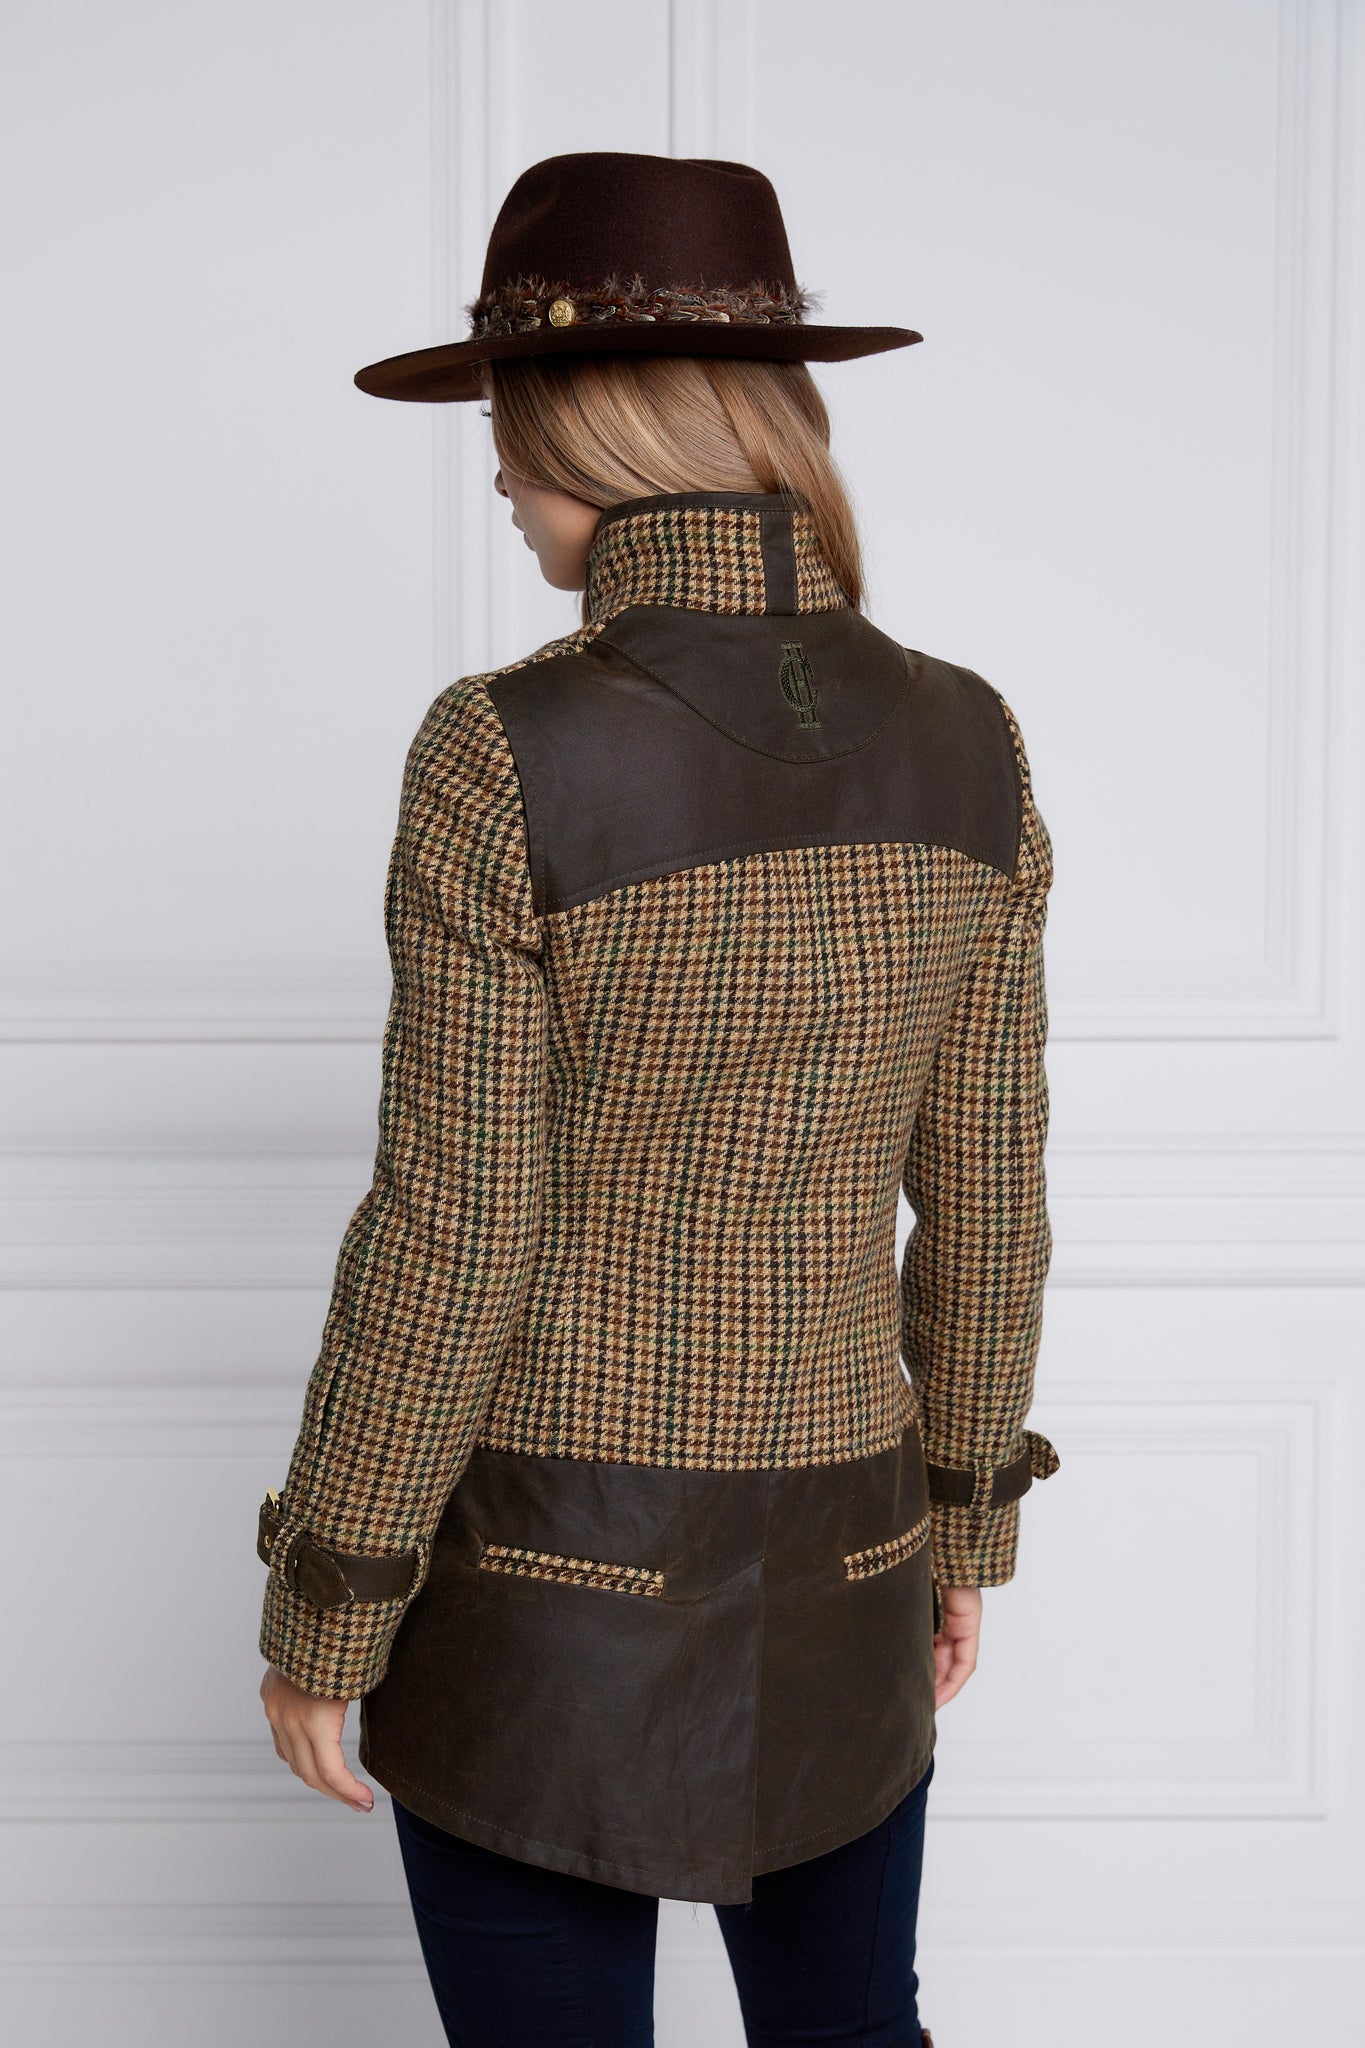 back of womens fitted field jacket in stone brown and green houndstooth tweed trimmed with contrast chocolate Millerain Wax fabric on shoulder across back and on the hip finished with horn button fastenings an buckles on the collar cuffs and hip